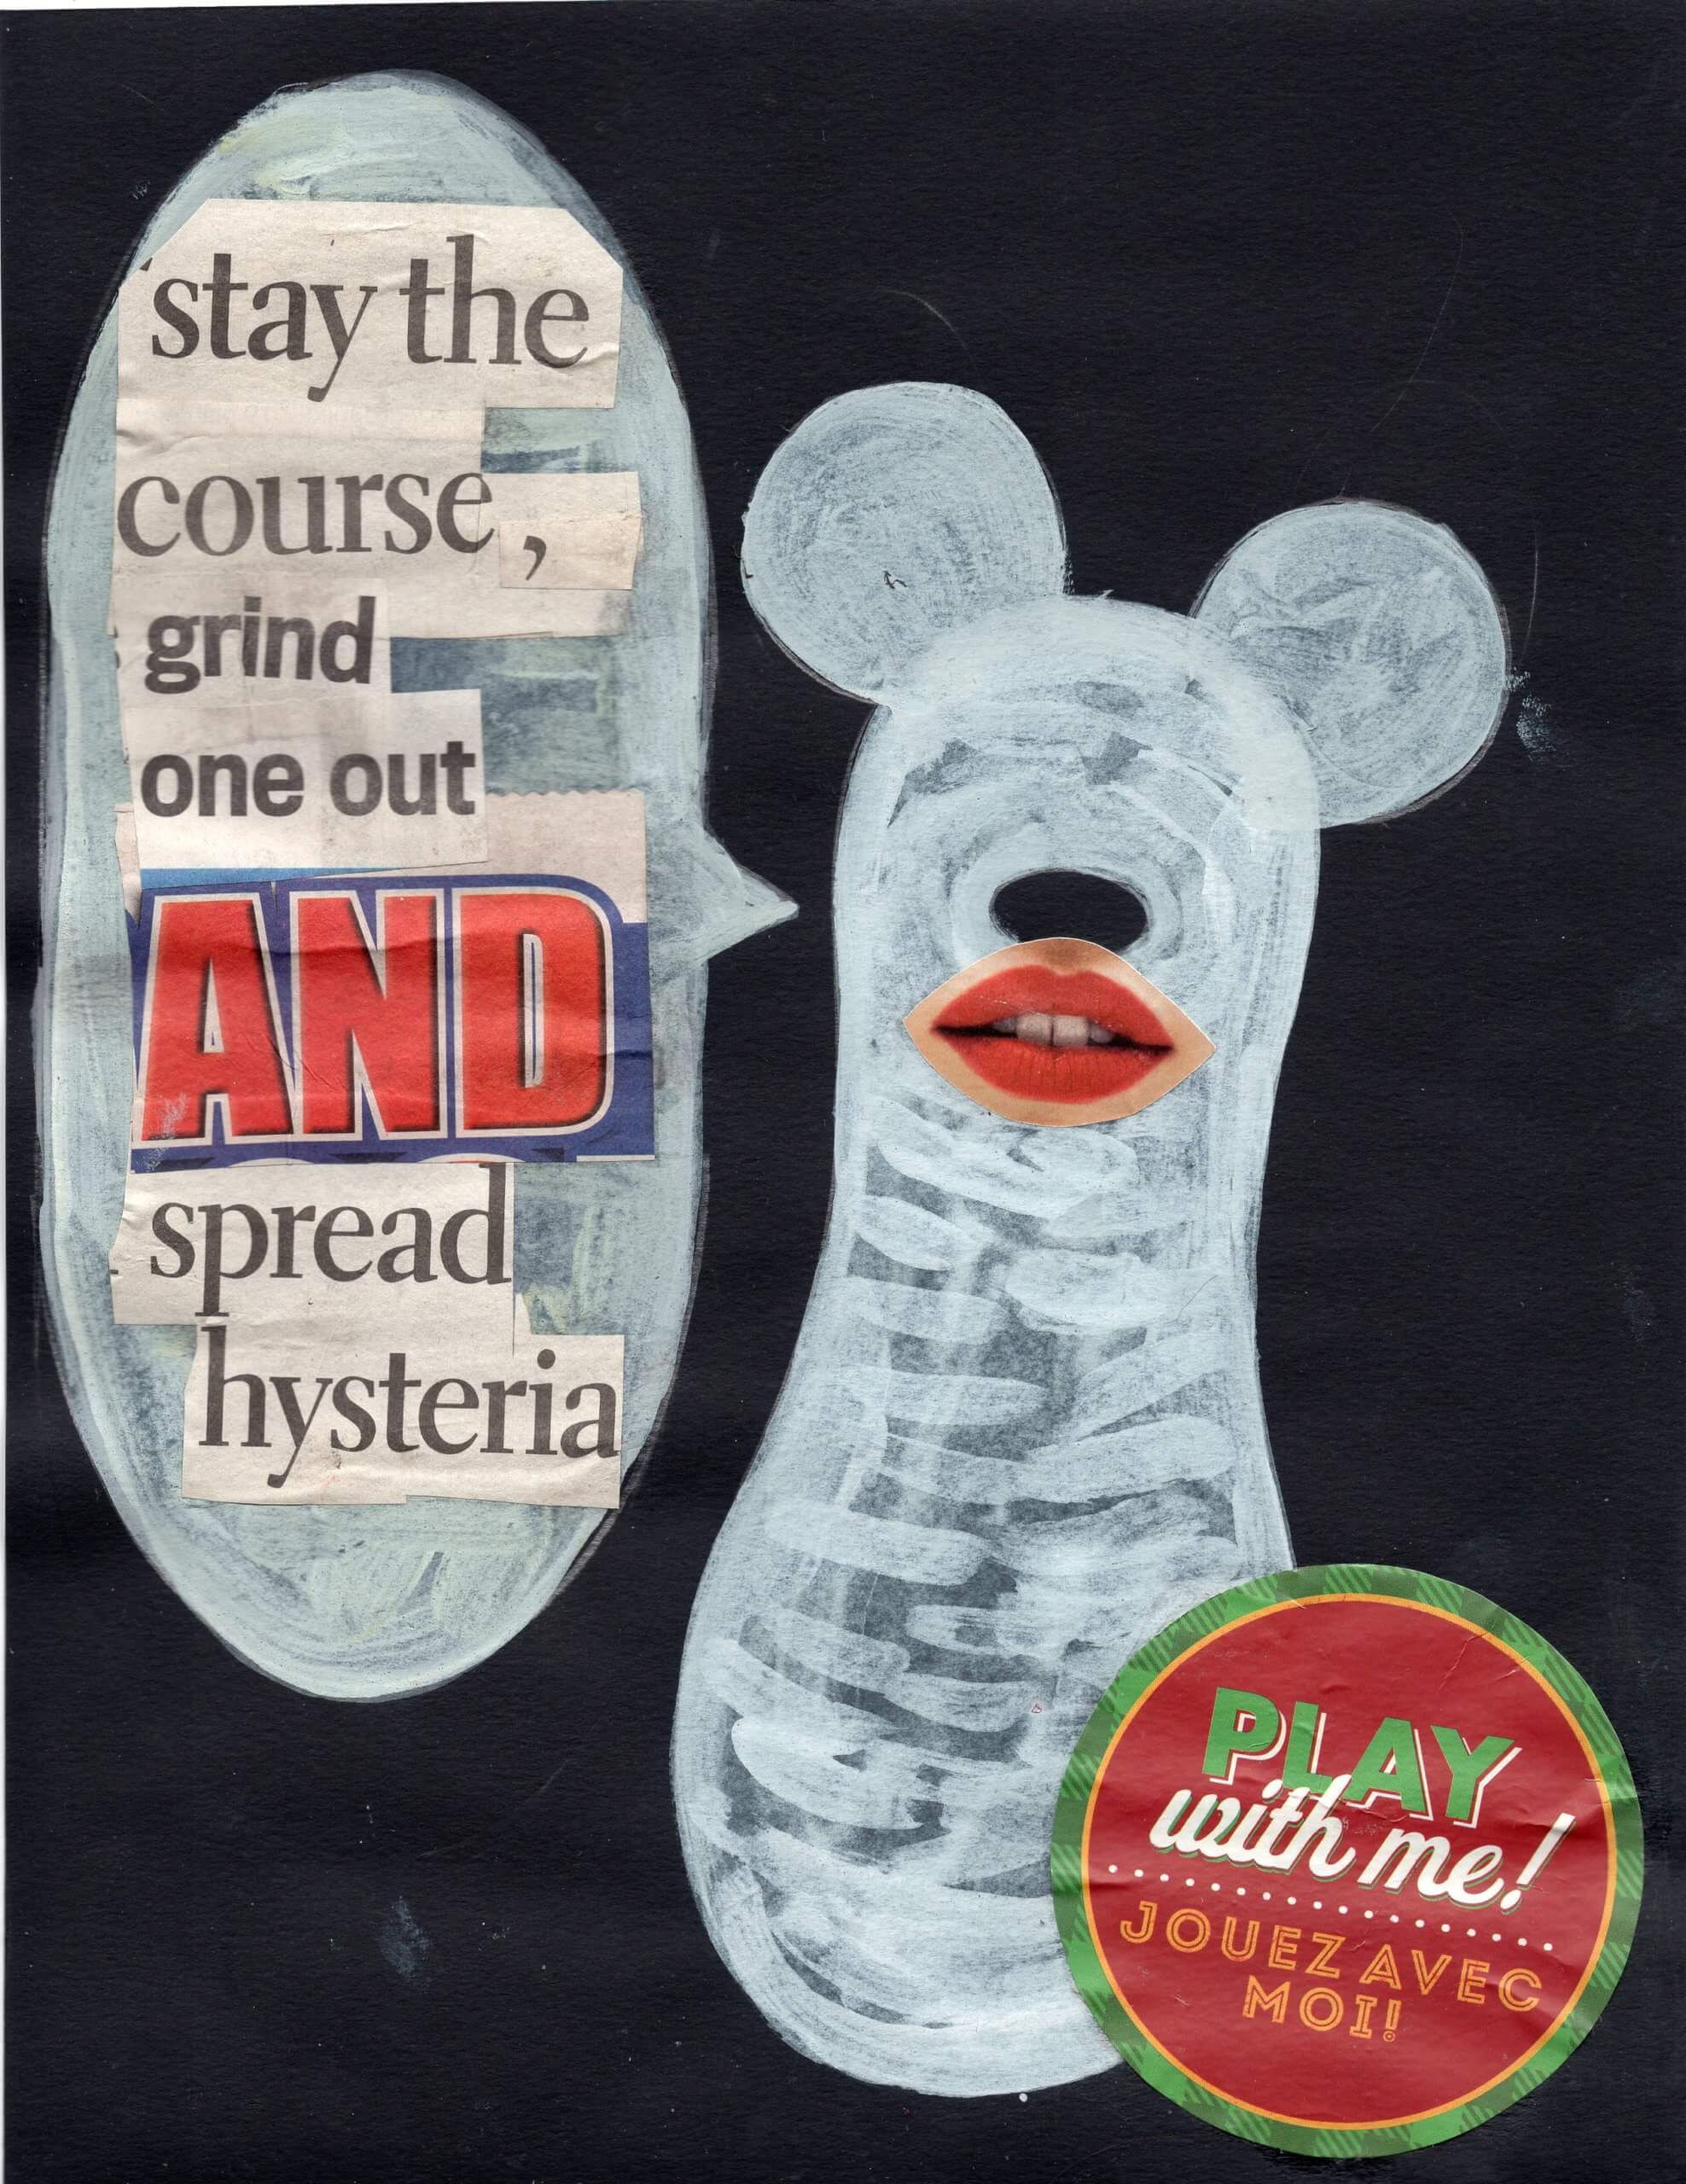 a partly painted and collaged image of a white painted peanut shaped figure with Mickey Mouse ears, a black button nose and a cut out of a pair of red lips, with a message in a speech bubble that reads "Stay the course, grind one out and spread hysteria", assembled in newspaper cuttings.